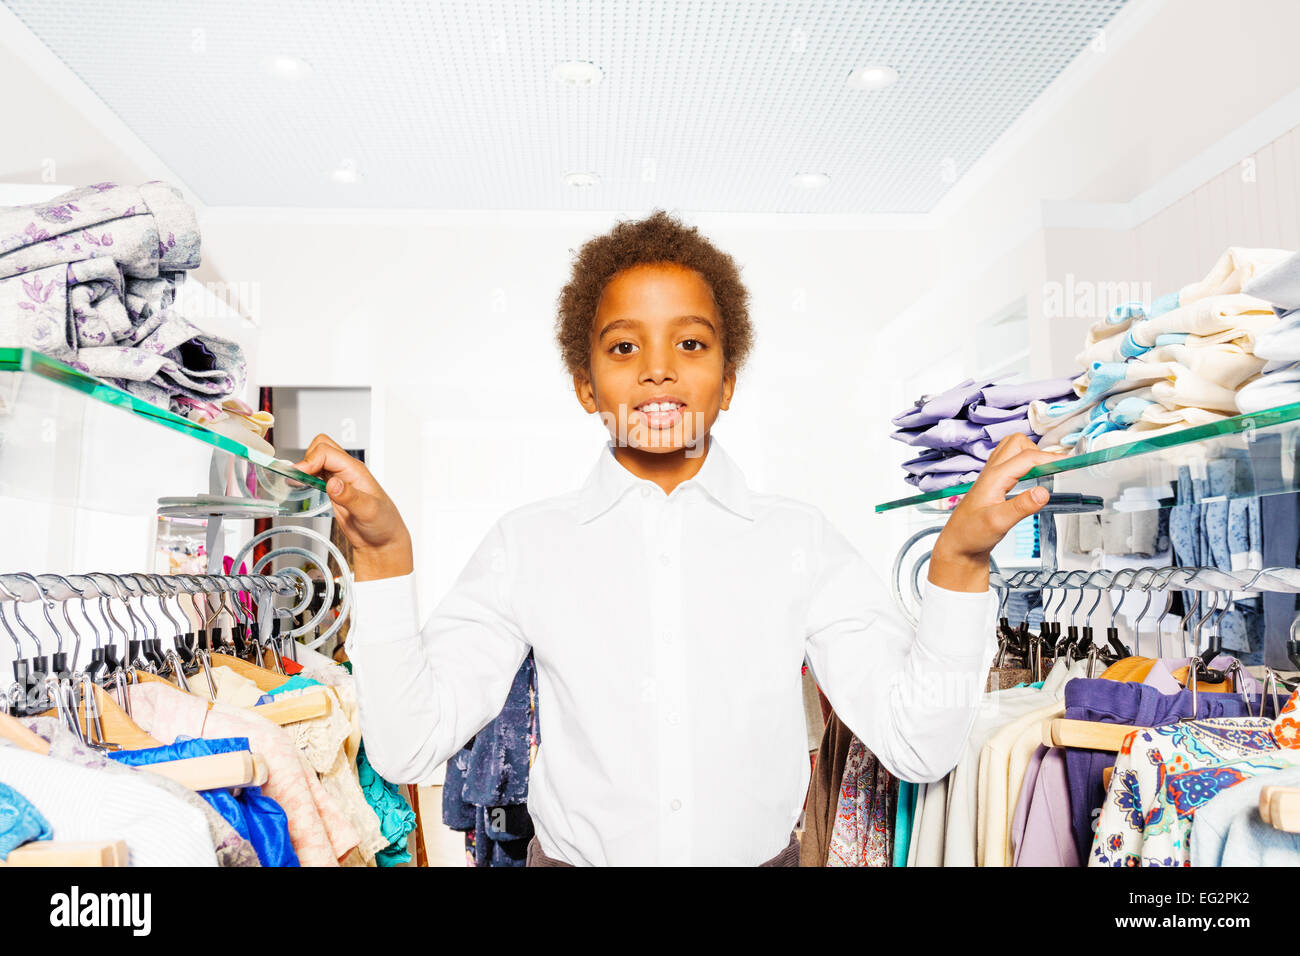 African boy in white shirt stand between hangers Stock Photo